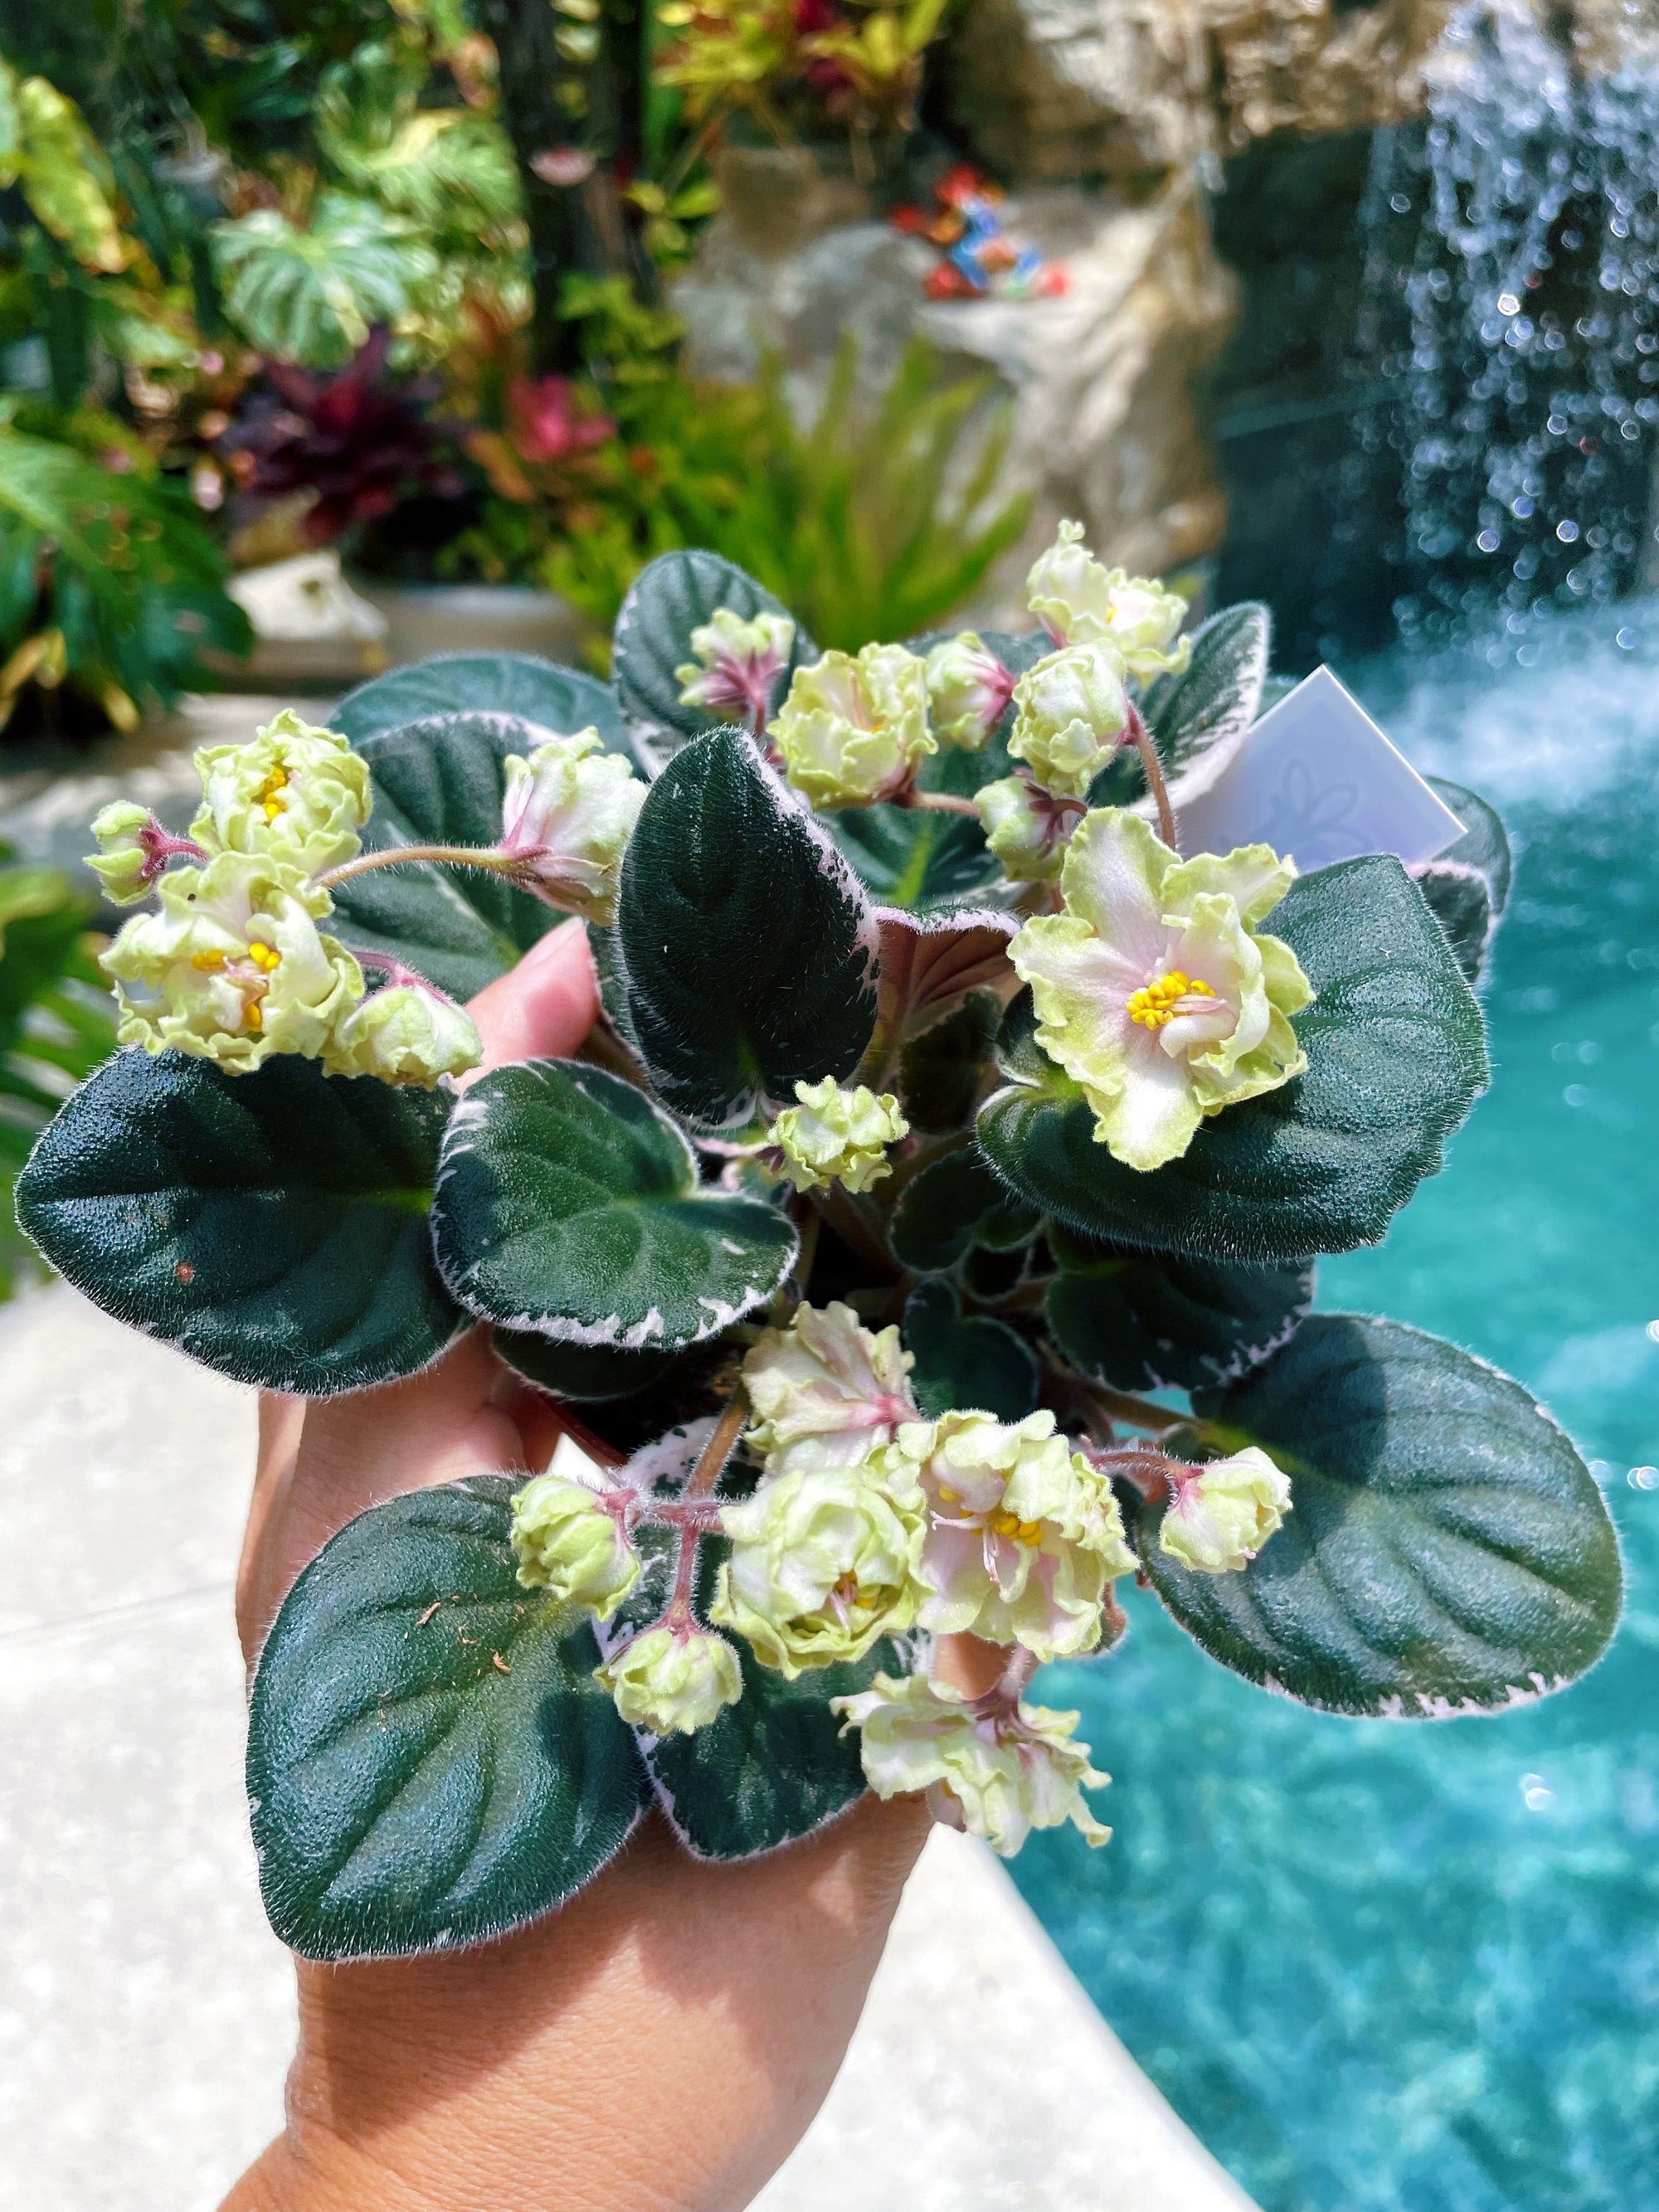 Live house plant huge ruffled Fuchsia bloom variegated African Violet Harmonys Mean Green garden 4 pot flower Potted gift